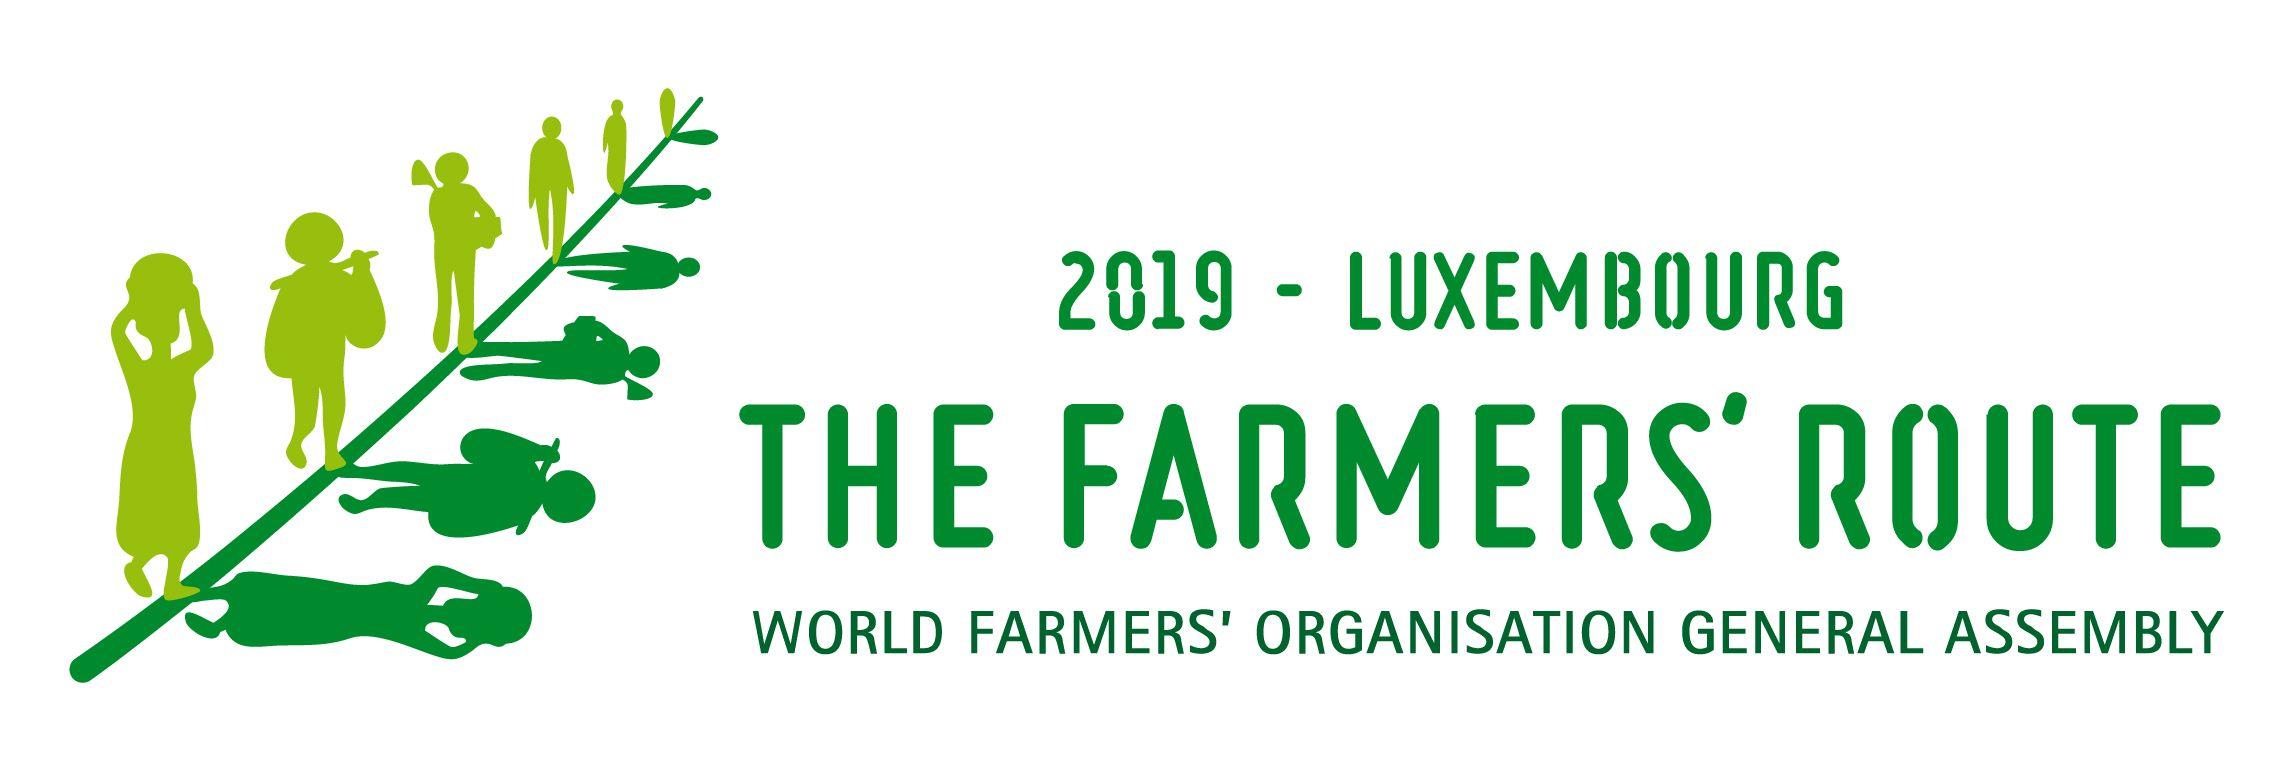 WFO Logo - WFO GENERAL ASSEMBLY | Luxembourg 20/23 May 2019 – THE FARMER'S ROUTE